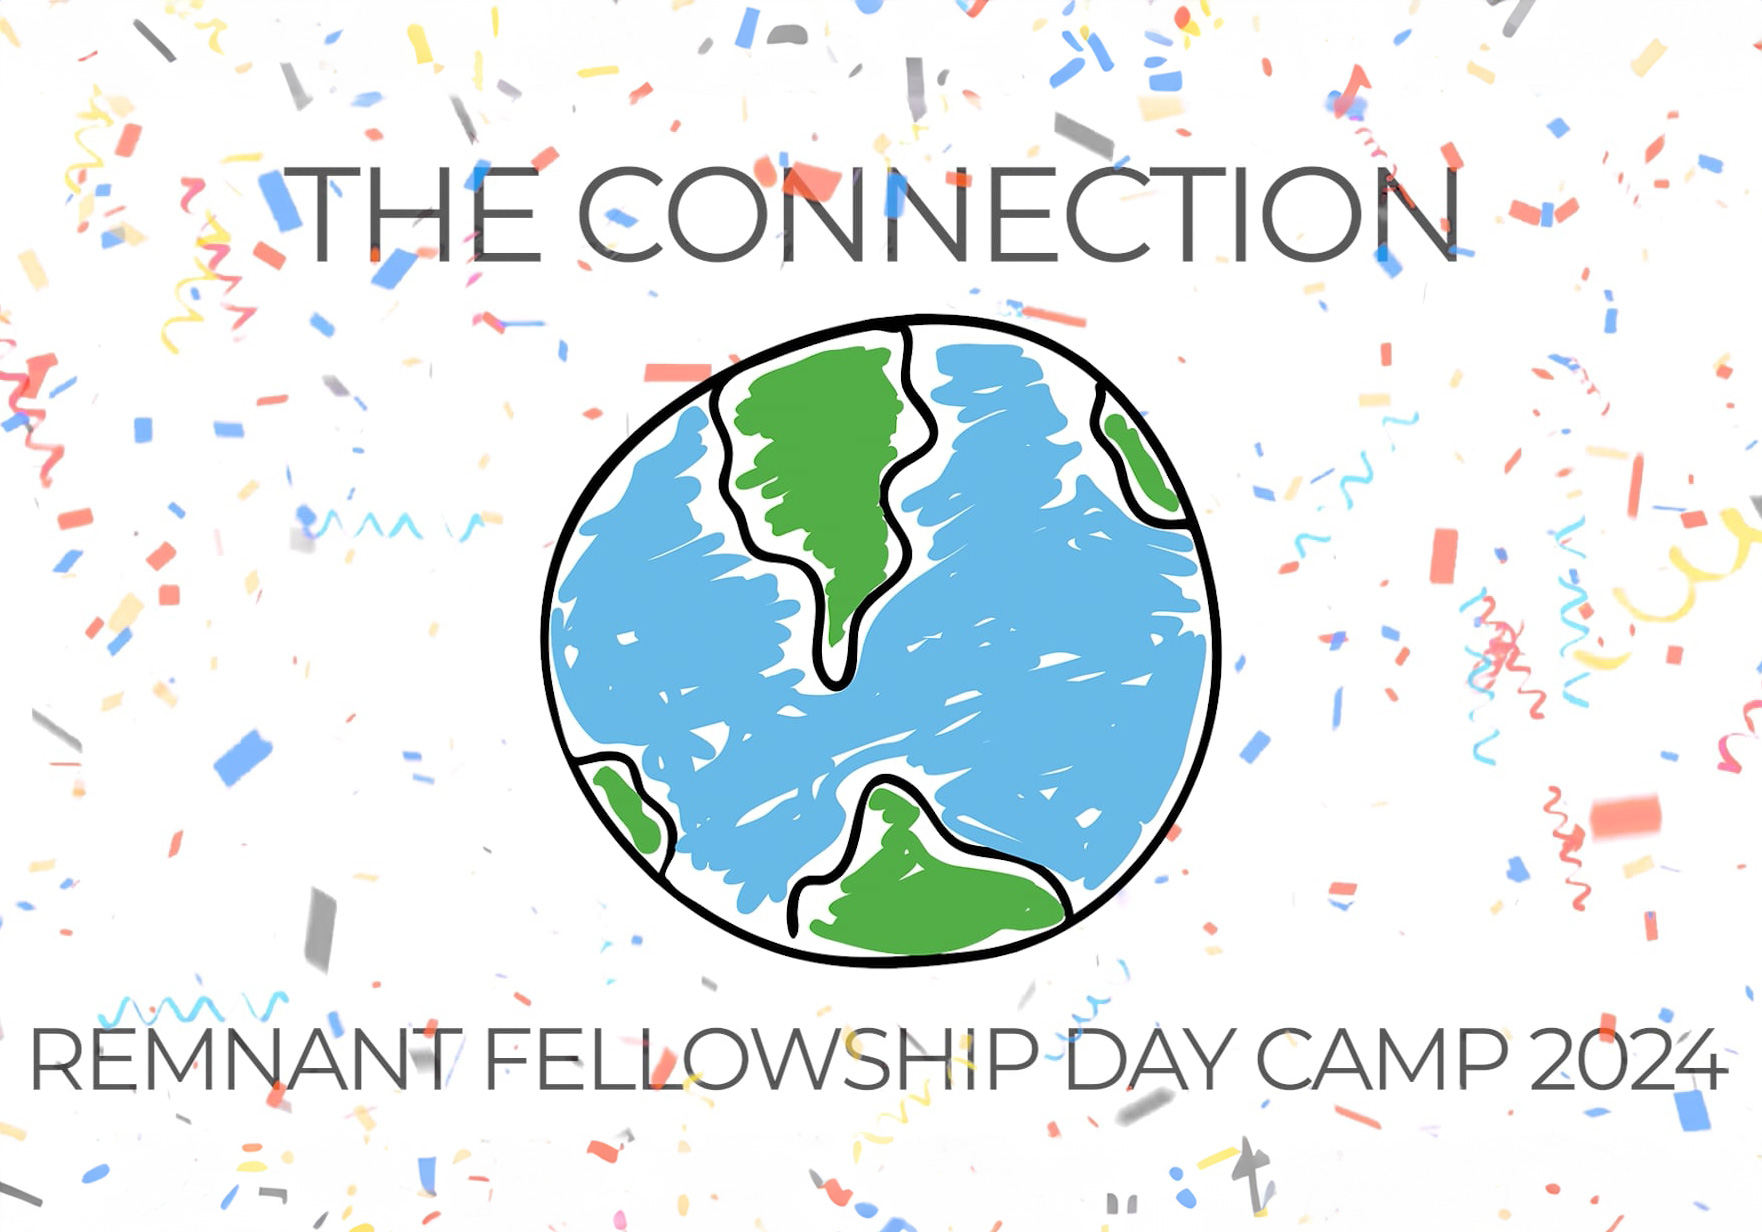 Remnant-Fellowship-Day-Camp-2024-Banner